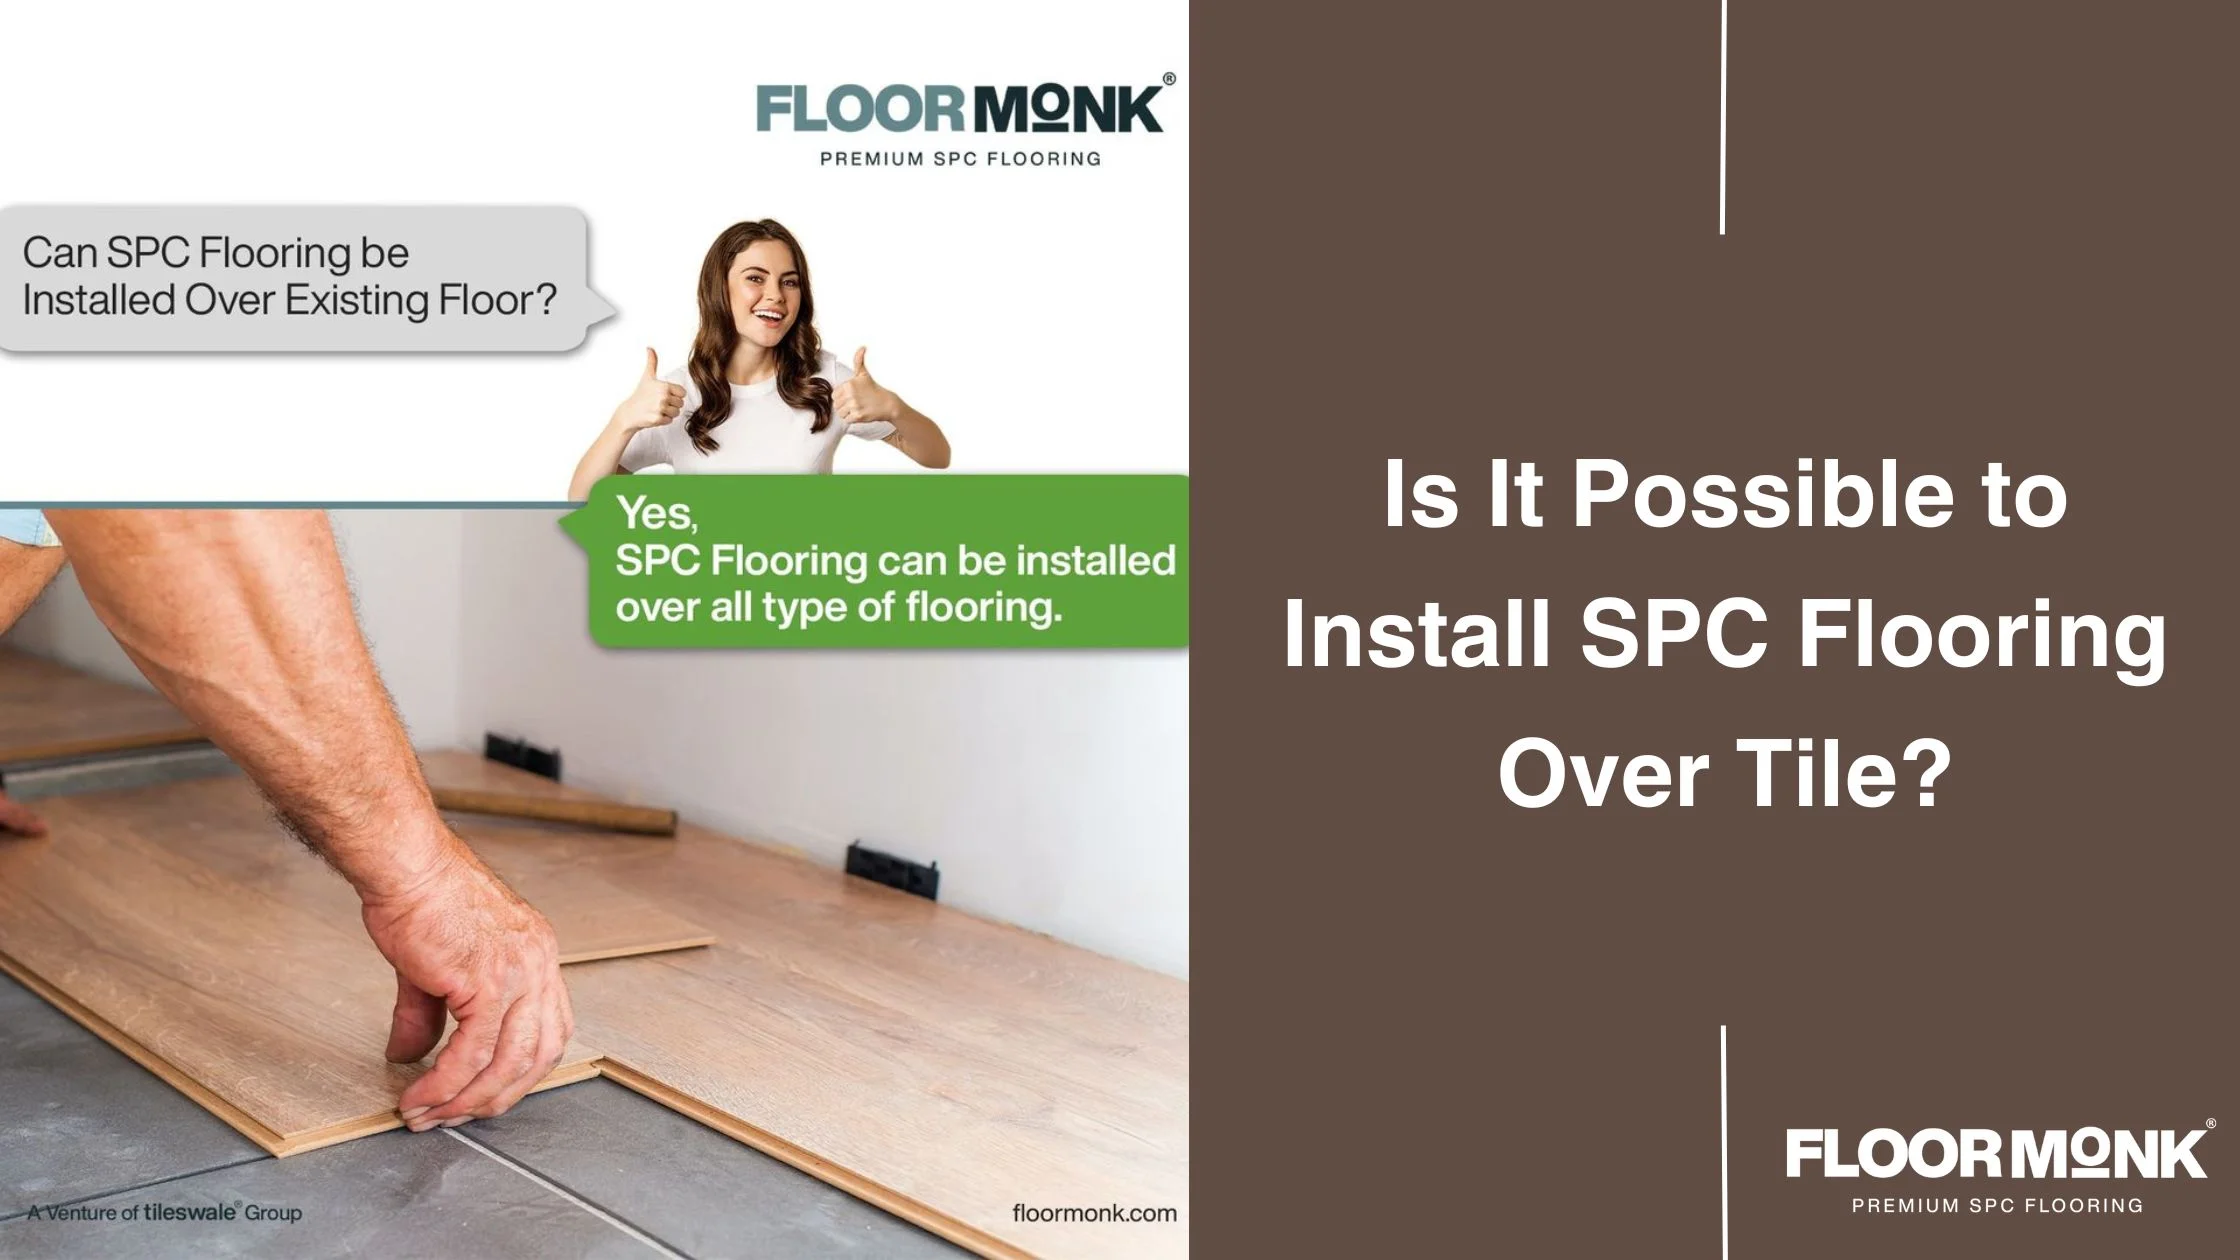 Is It Possible To Install SPC Flooring Over Tile?